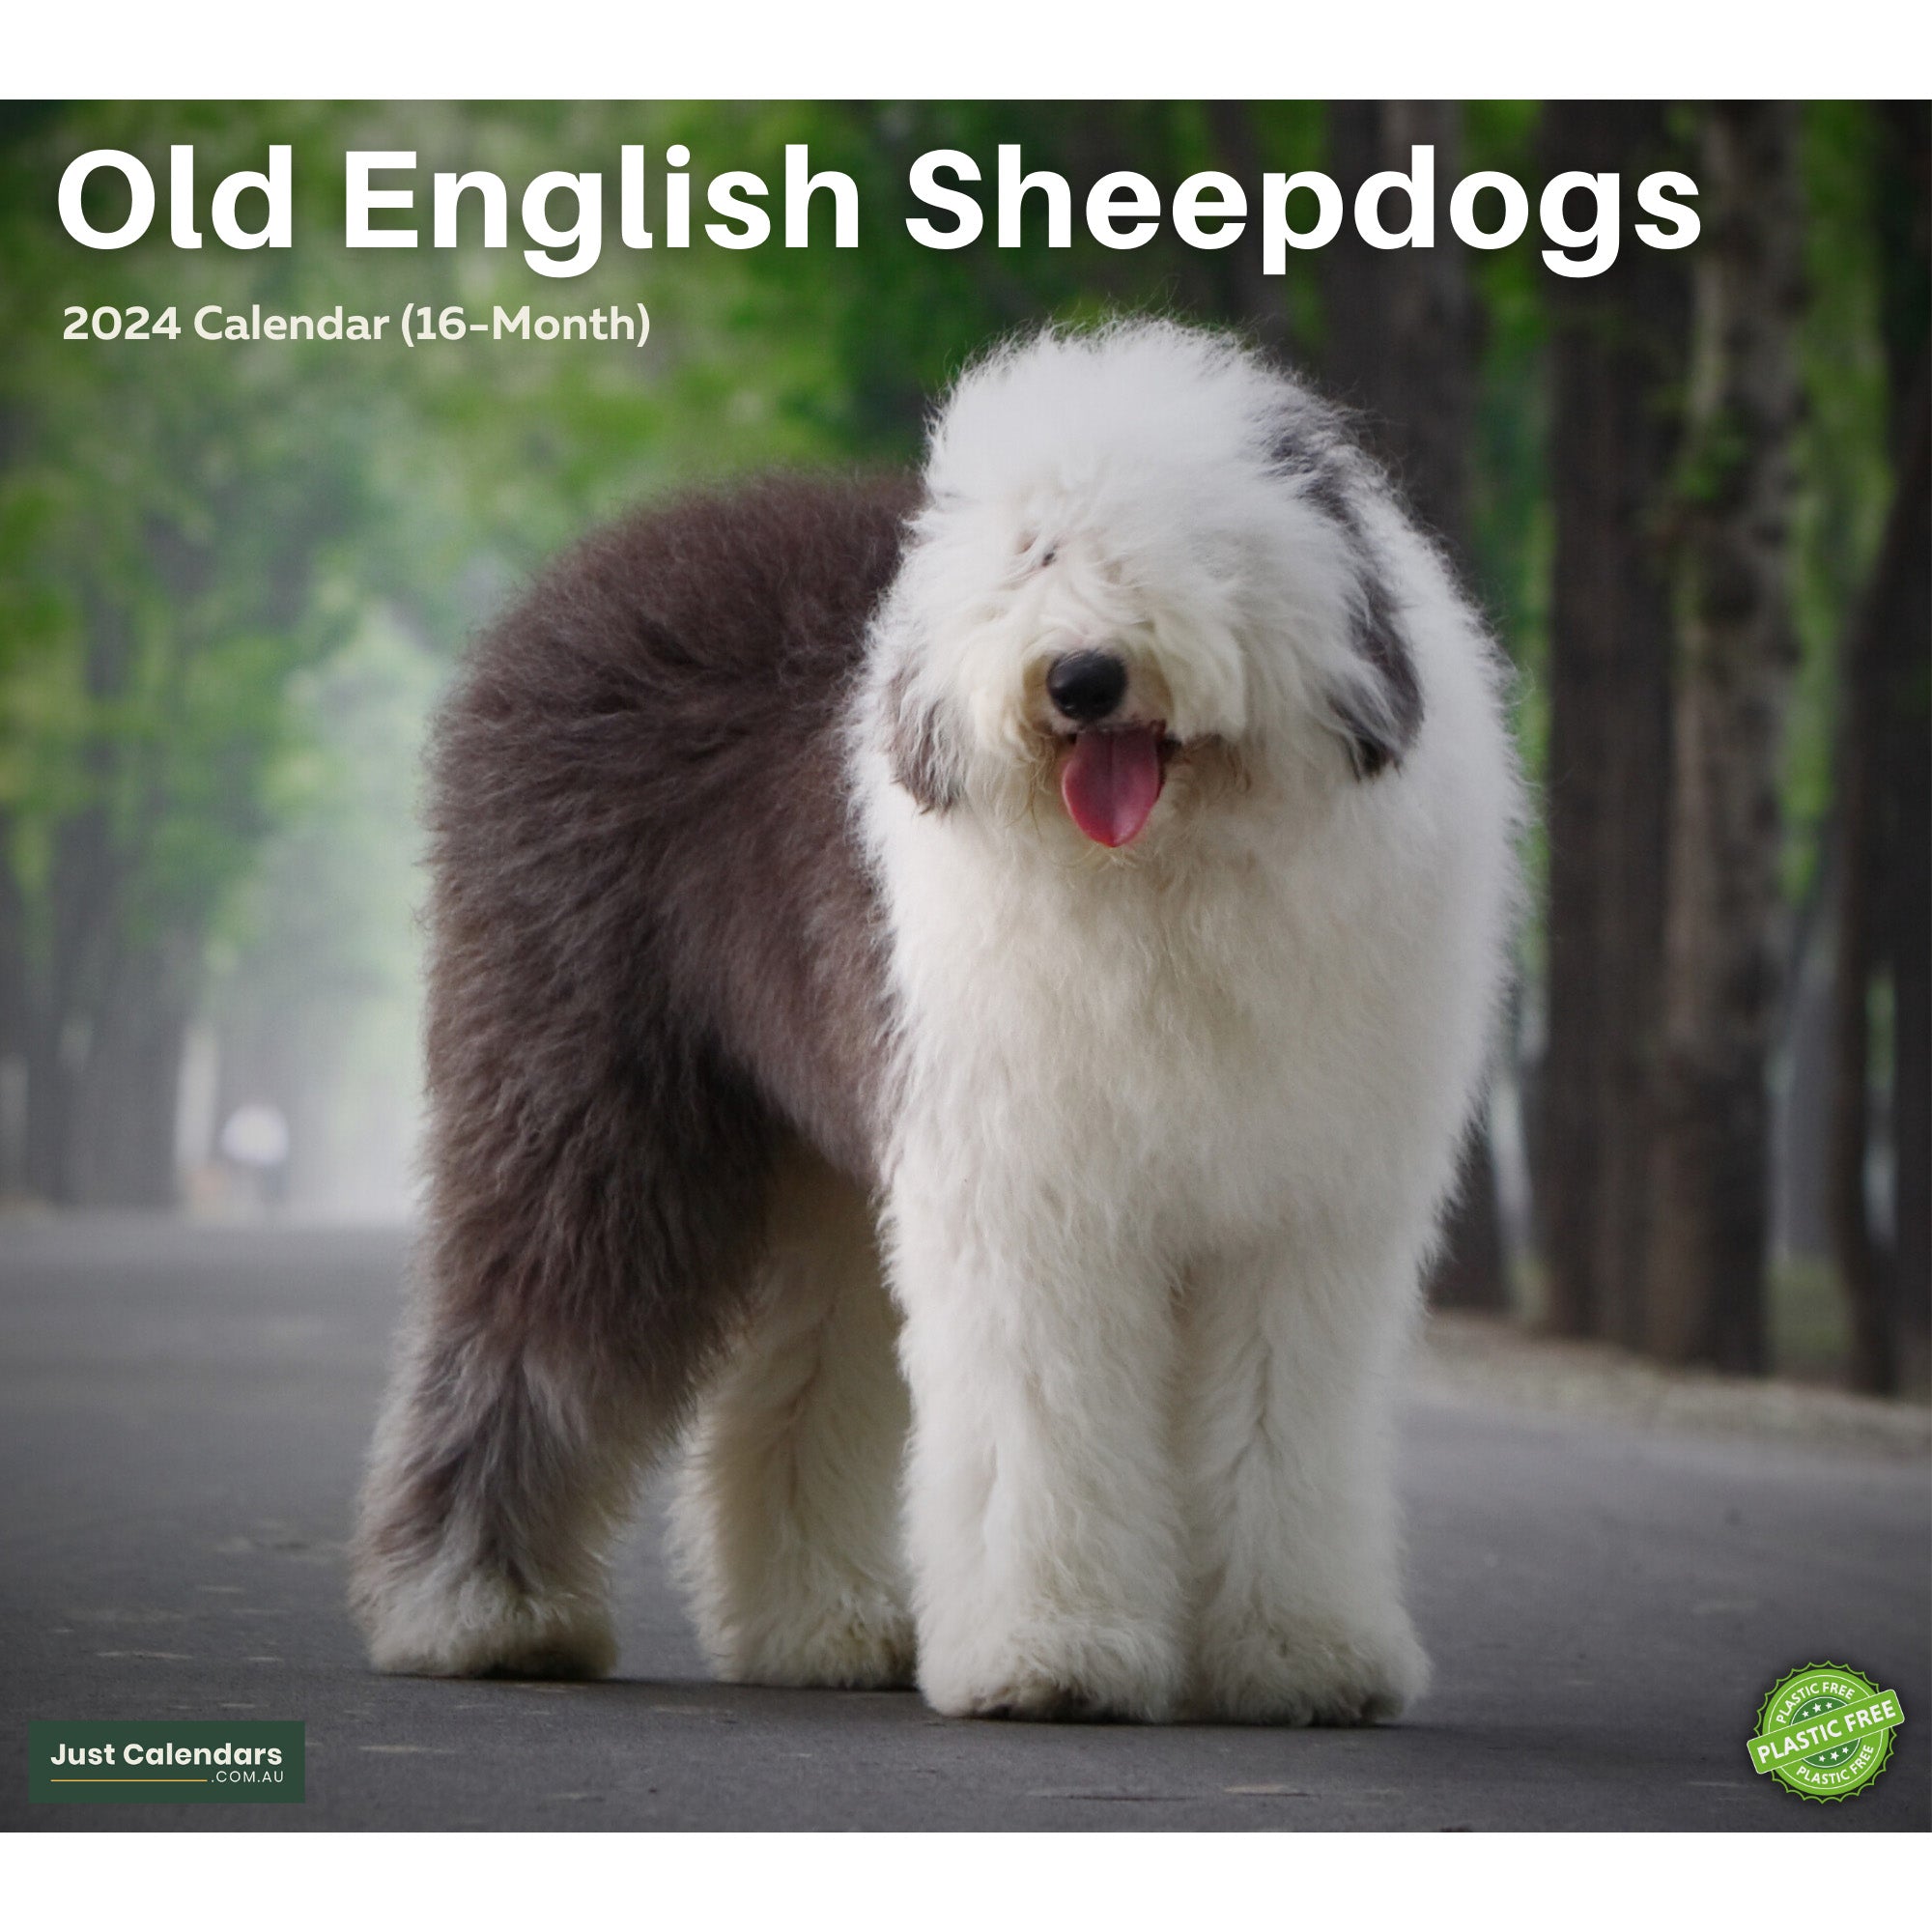 2024 Old English Sheepdogs Dogs & Puppies - Deluxe Wall Calendar by Just Calendars - 16 Month - Plastic Free